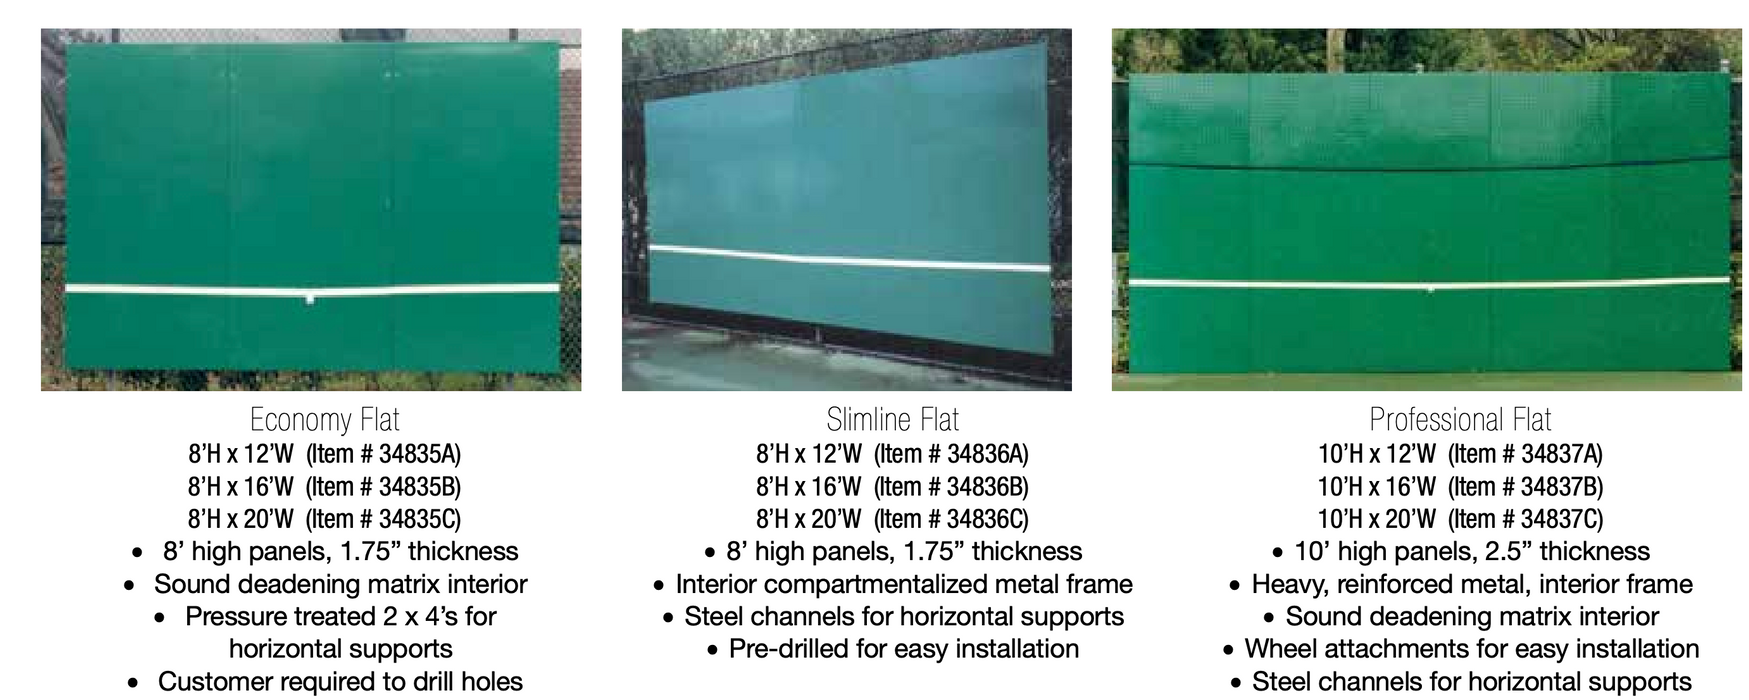 Bakko 10' Fiberglass & Gel Coated Professional Flat Series Backboard Bakko Backboards Company LogoThe panels of the Professional Flat Series are 2½" thick with metal interior frames dividing each panel into 20 sub-compartments. Each sub-compartment is filled with sound-deadening materials. Panels are encased in thick fiberglass and UV protective gel coat unitized under pressure in large molds